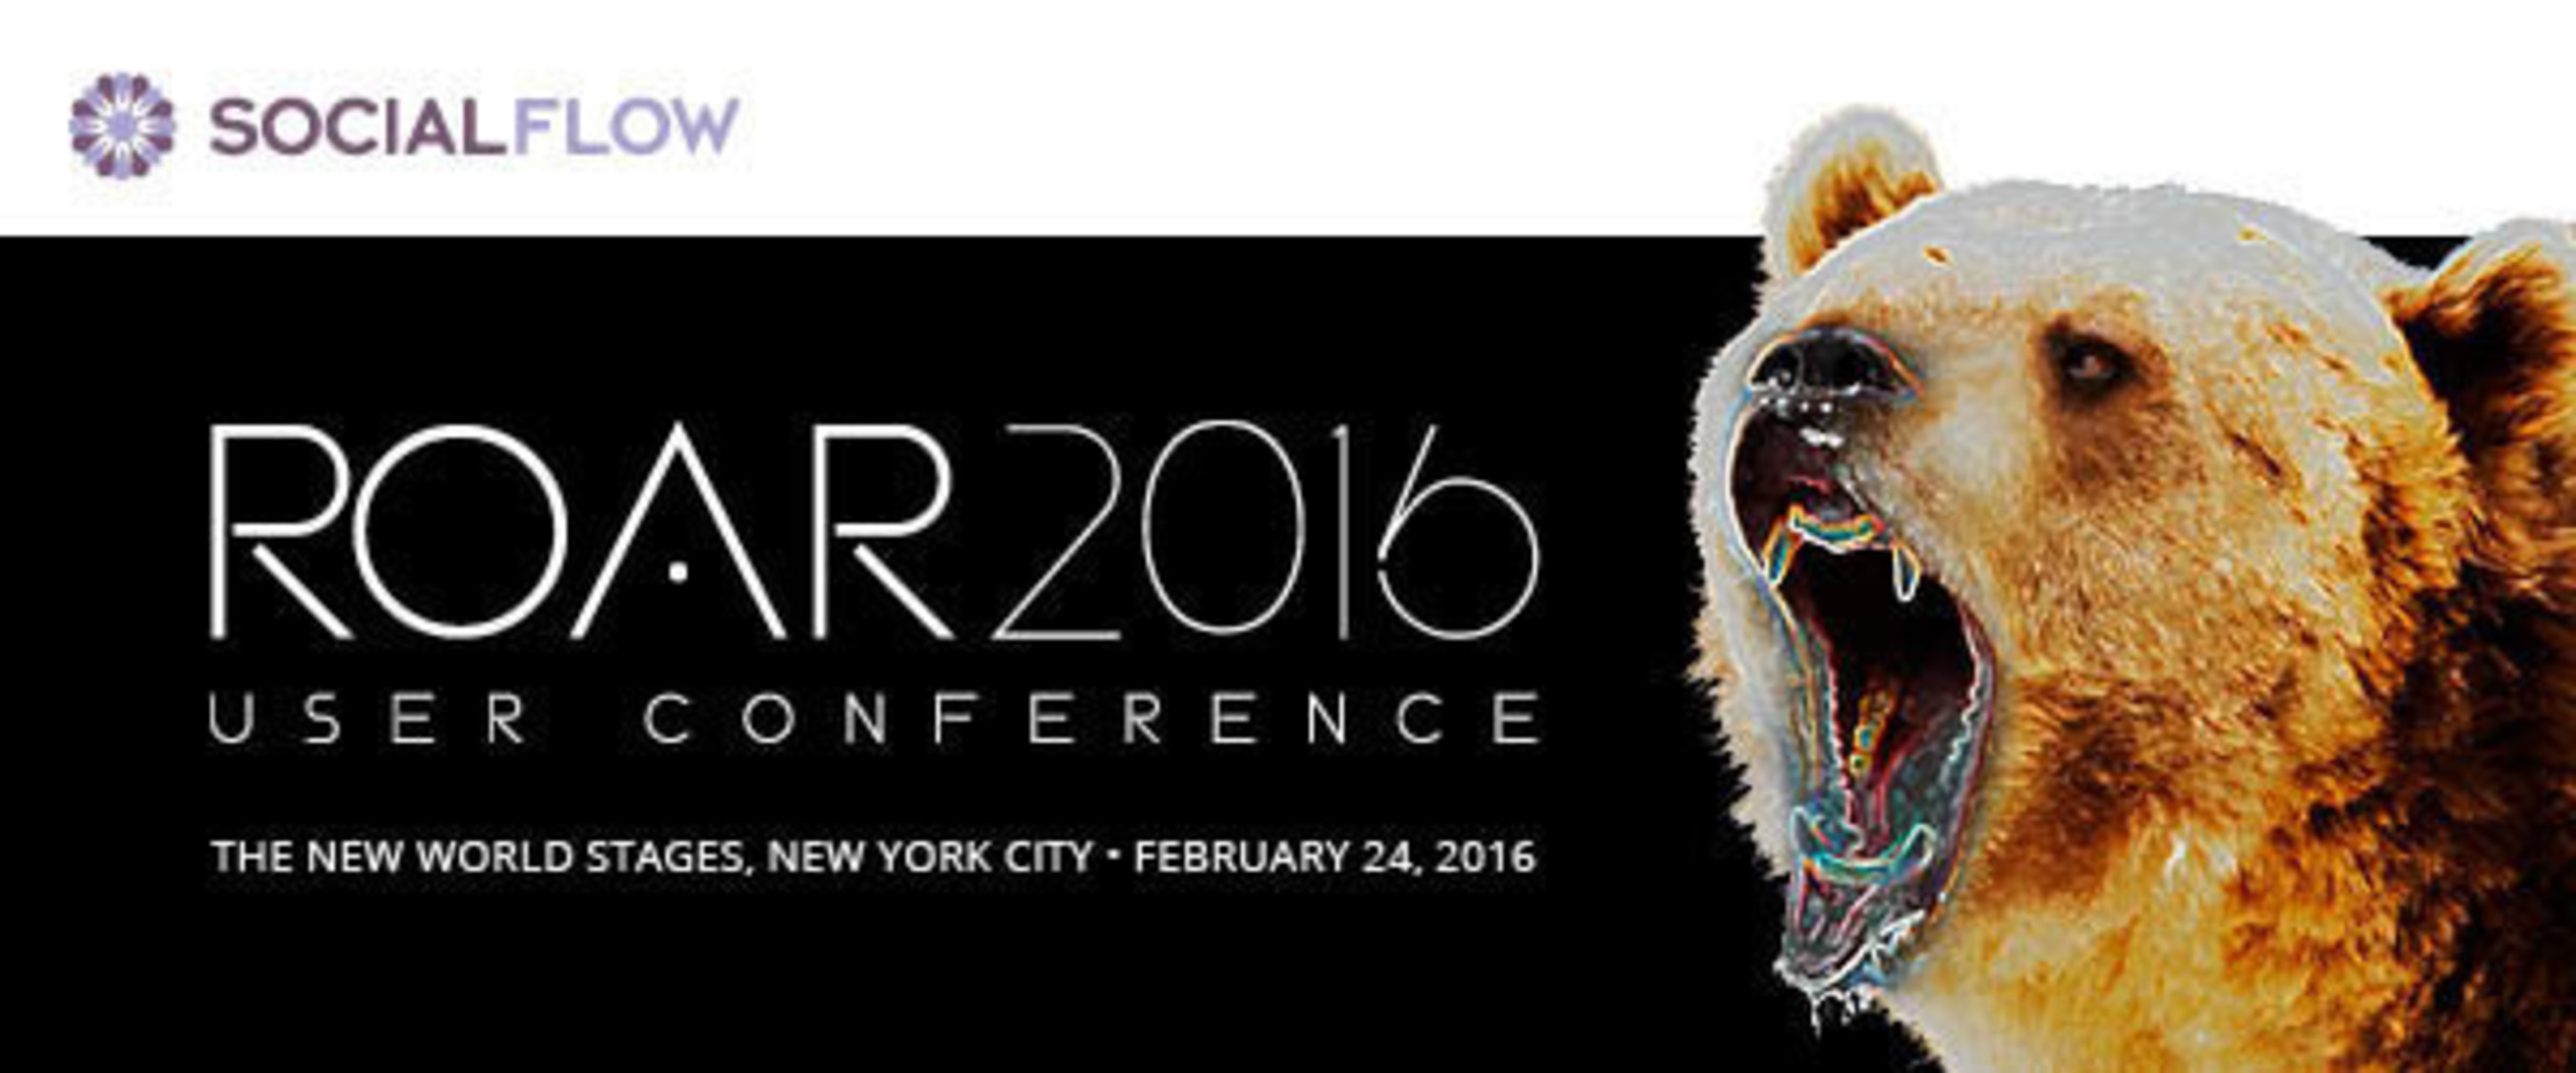 ROAR - The SocialFlow User Conference - Feb 24th NYC